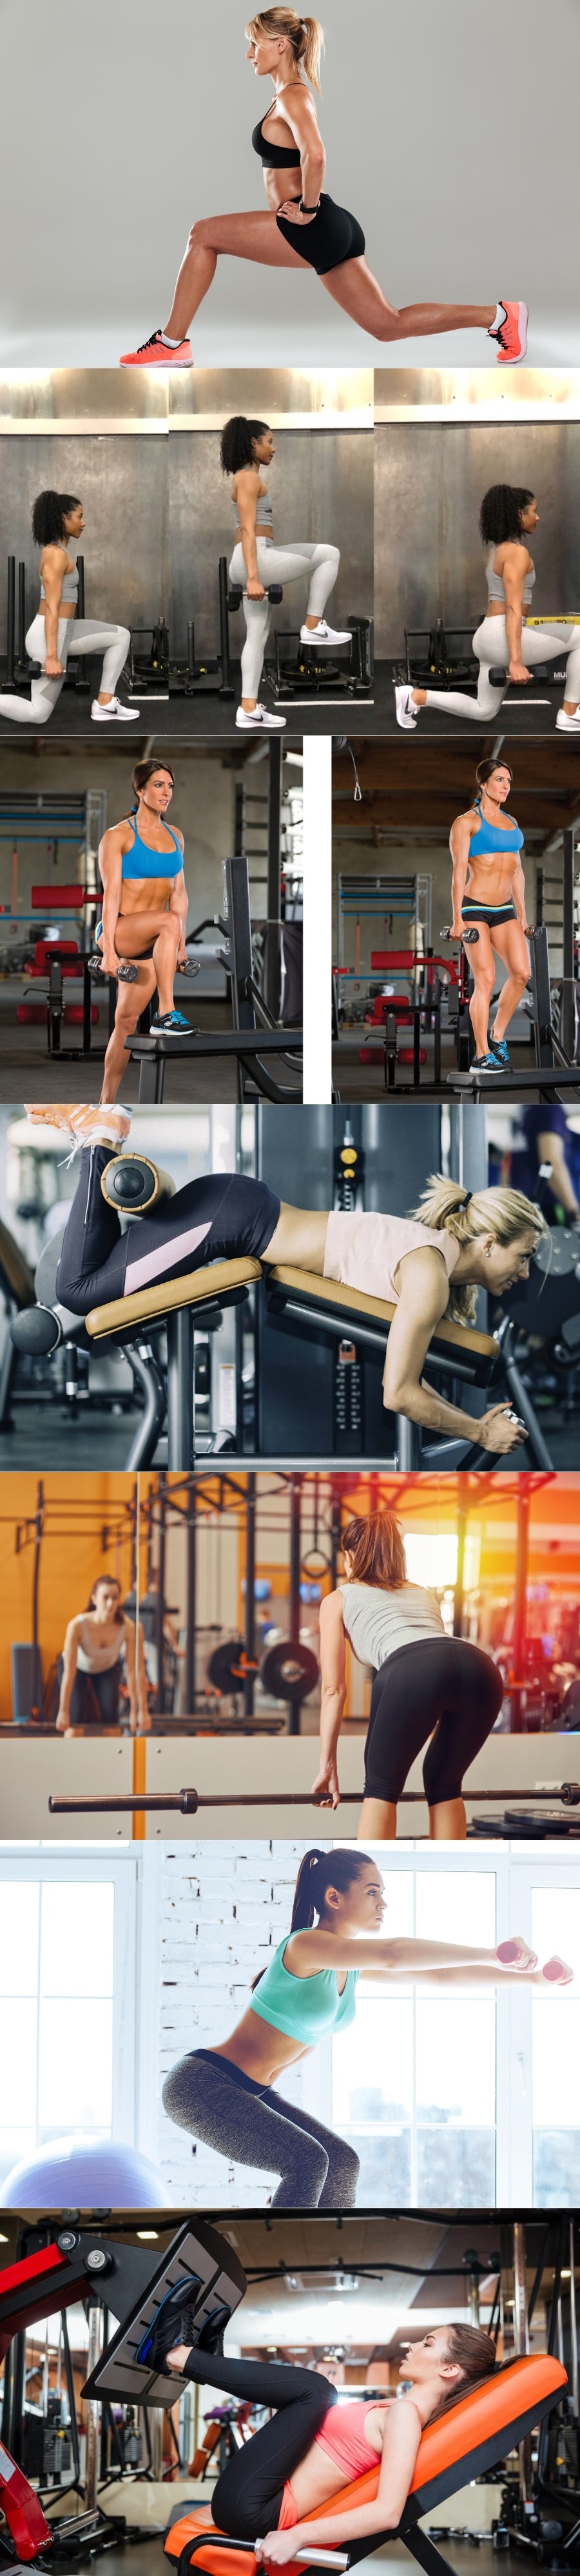 Best Exercises for Legs and Butt Workout